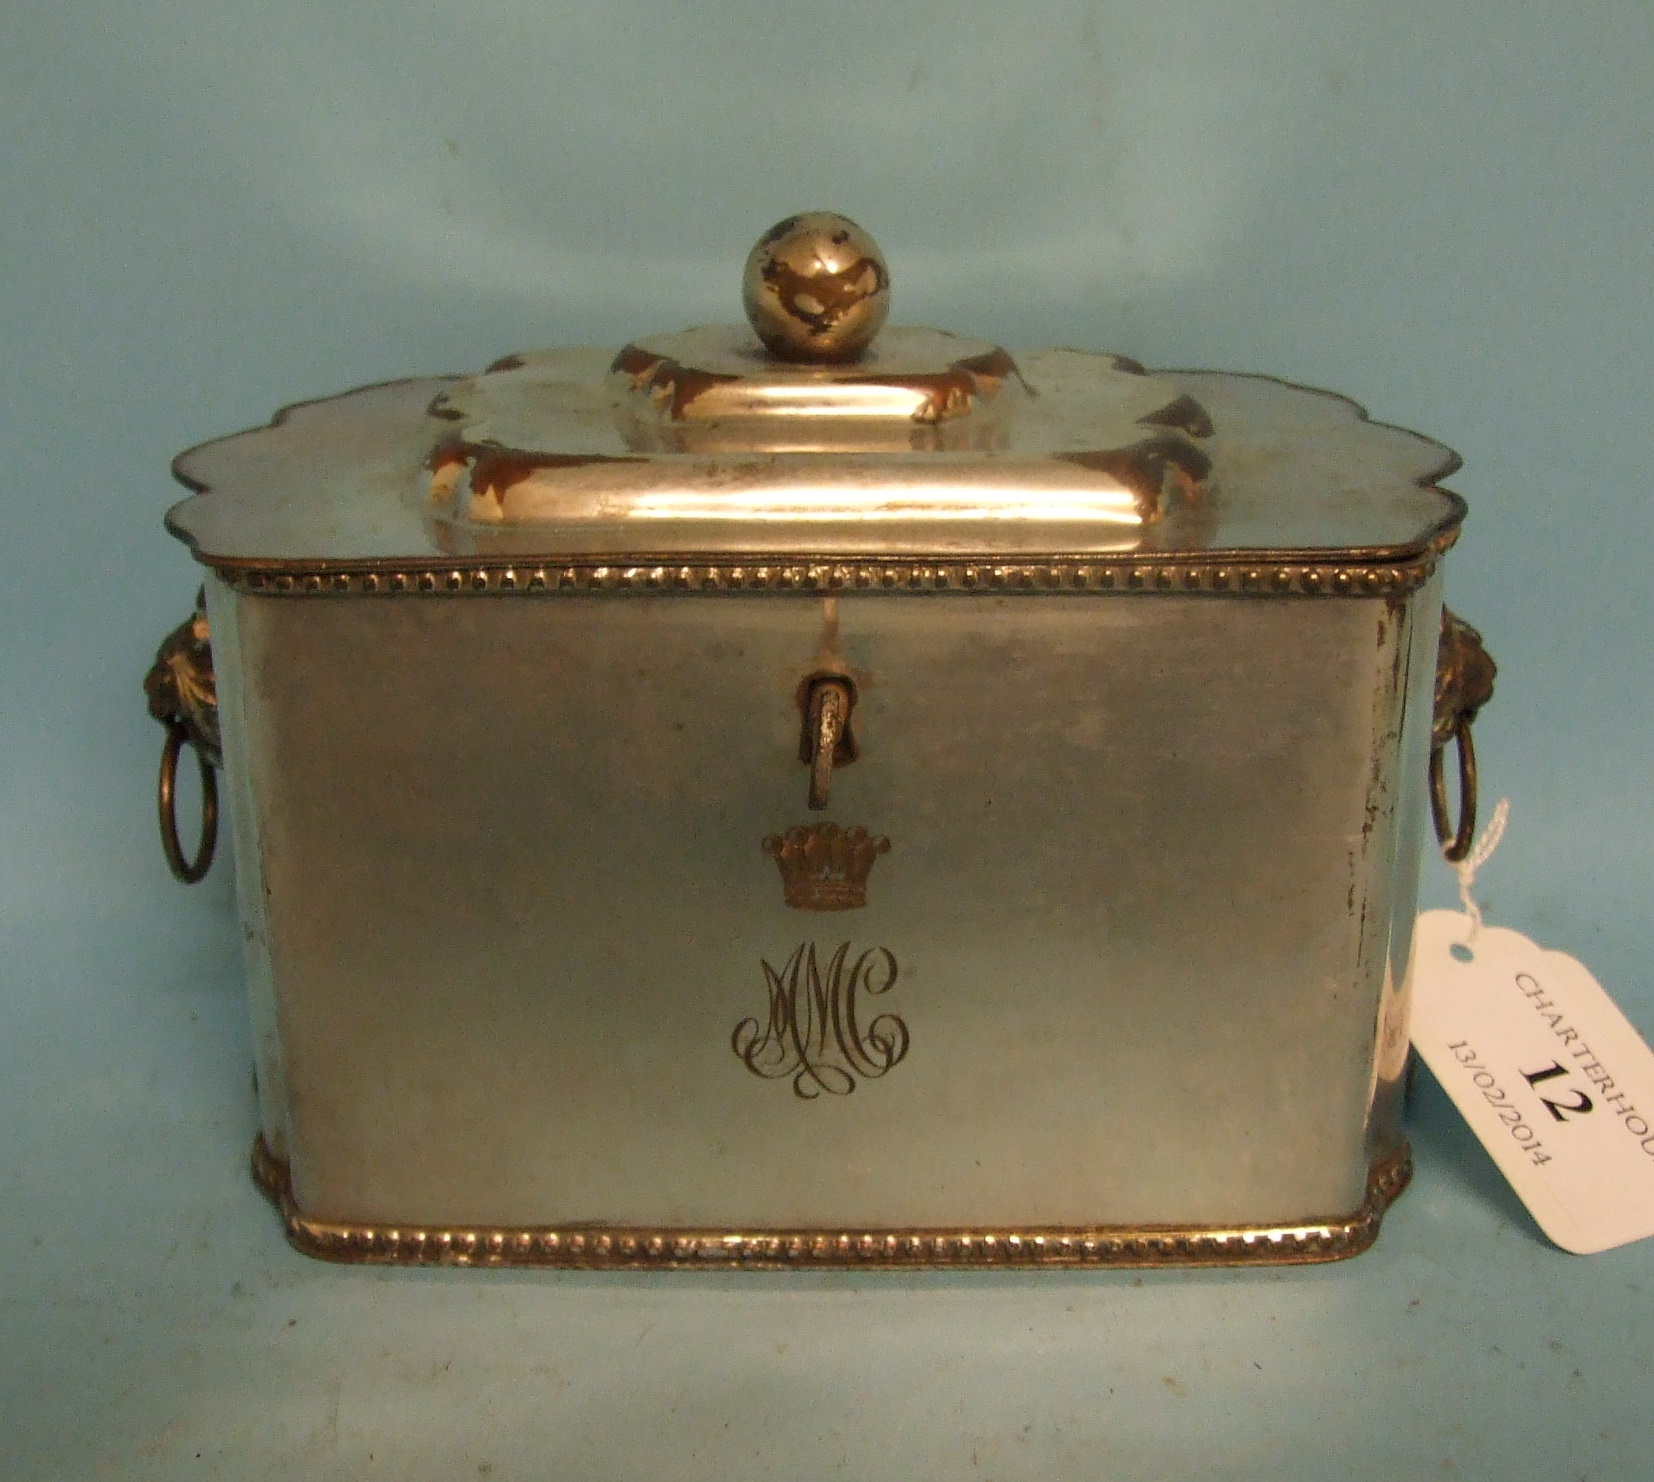 A silver plated tea caddy, 14 cm wide Condition report Report by JB

The tea caddy displays